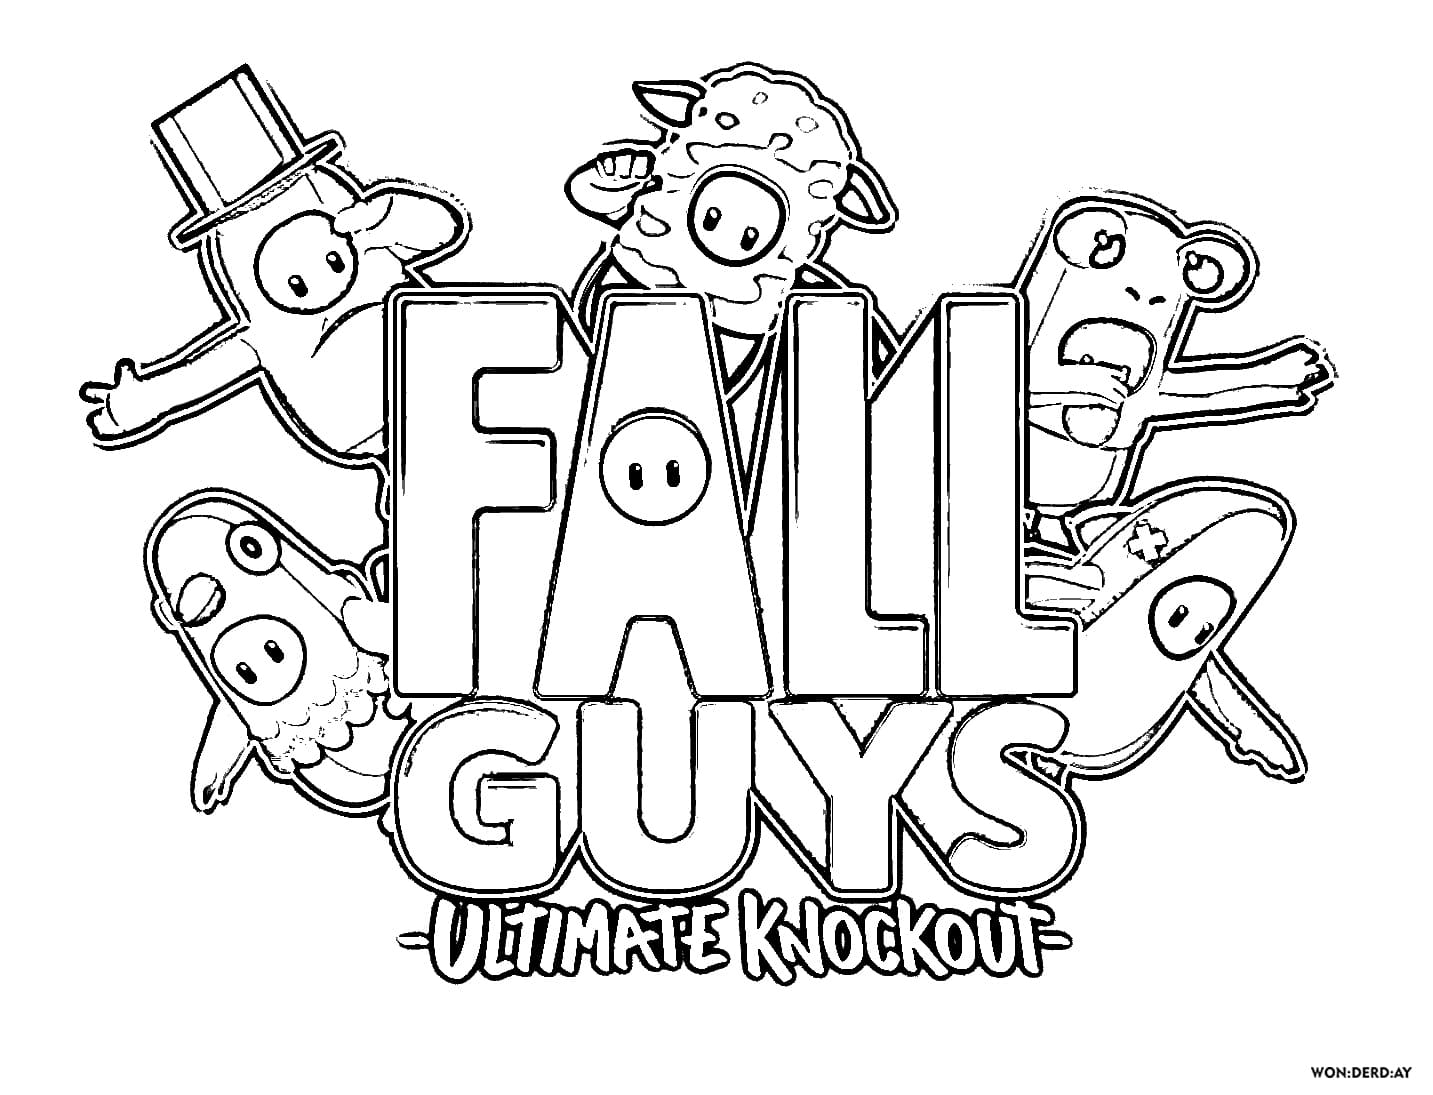 Fall Guys Coloring Page. Printwonder Day.com - Coloring Home